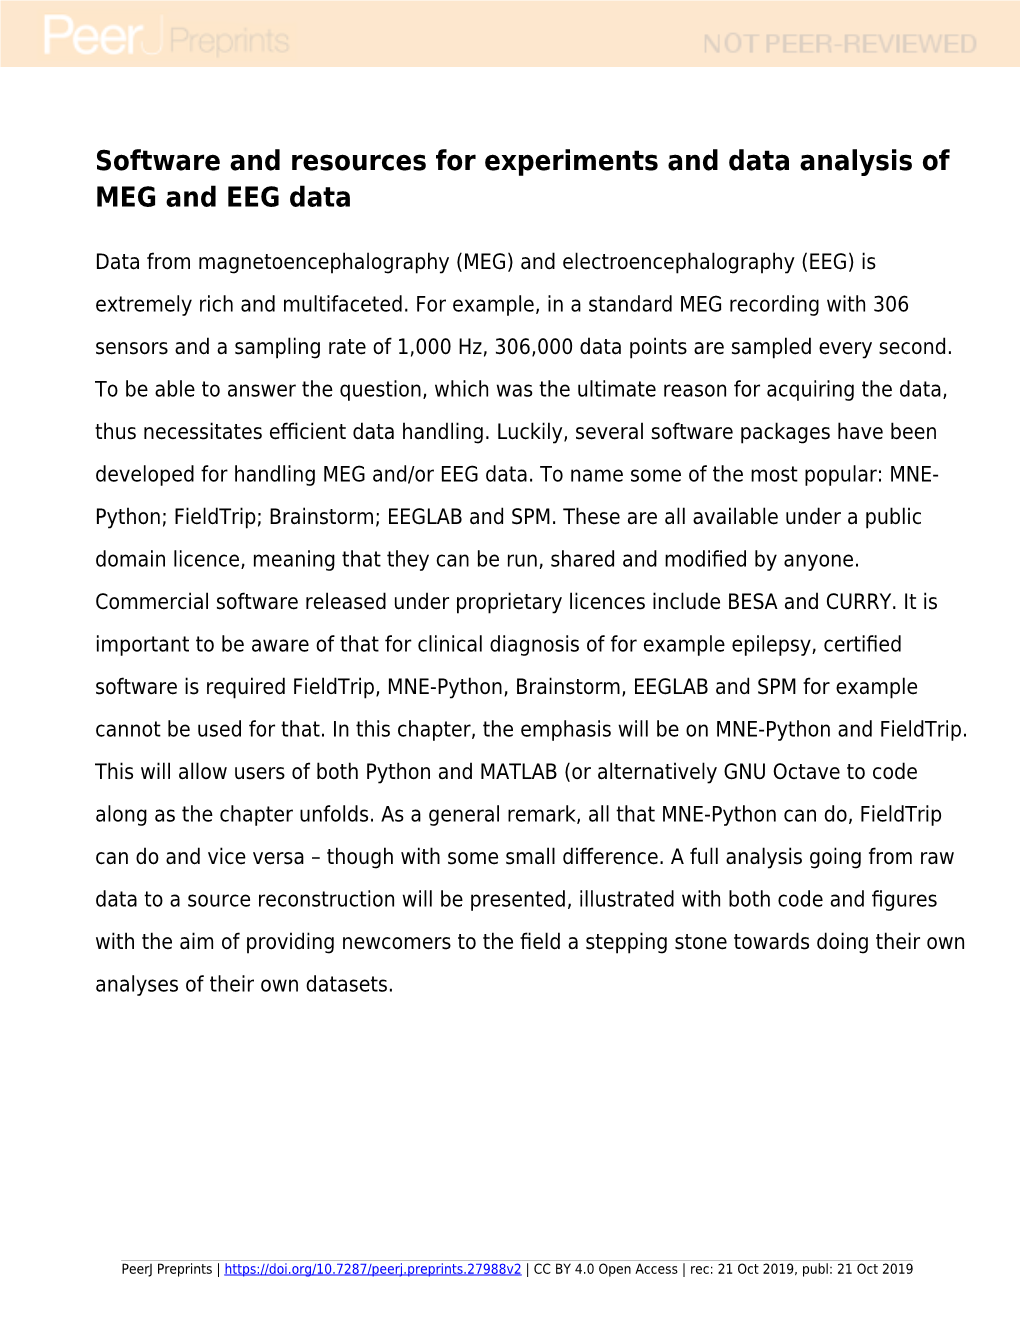 Software and Resources for Experiments and Data Analysis of MEG and EEG Data